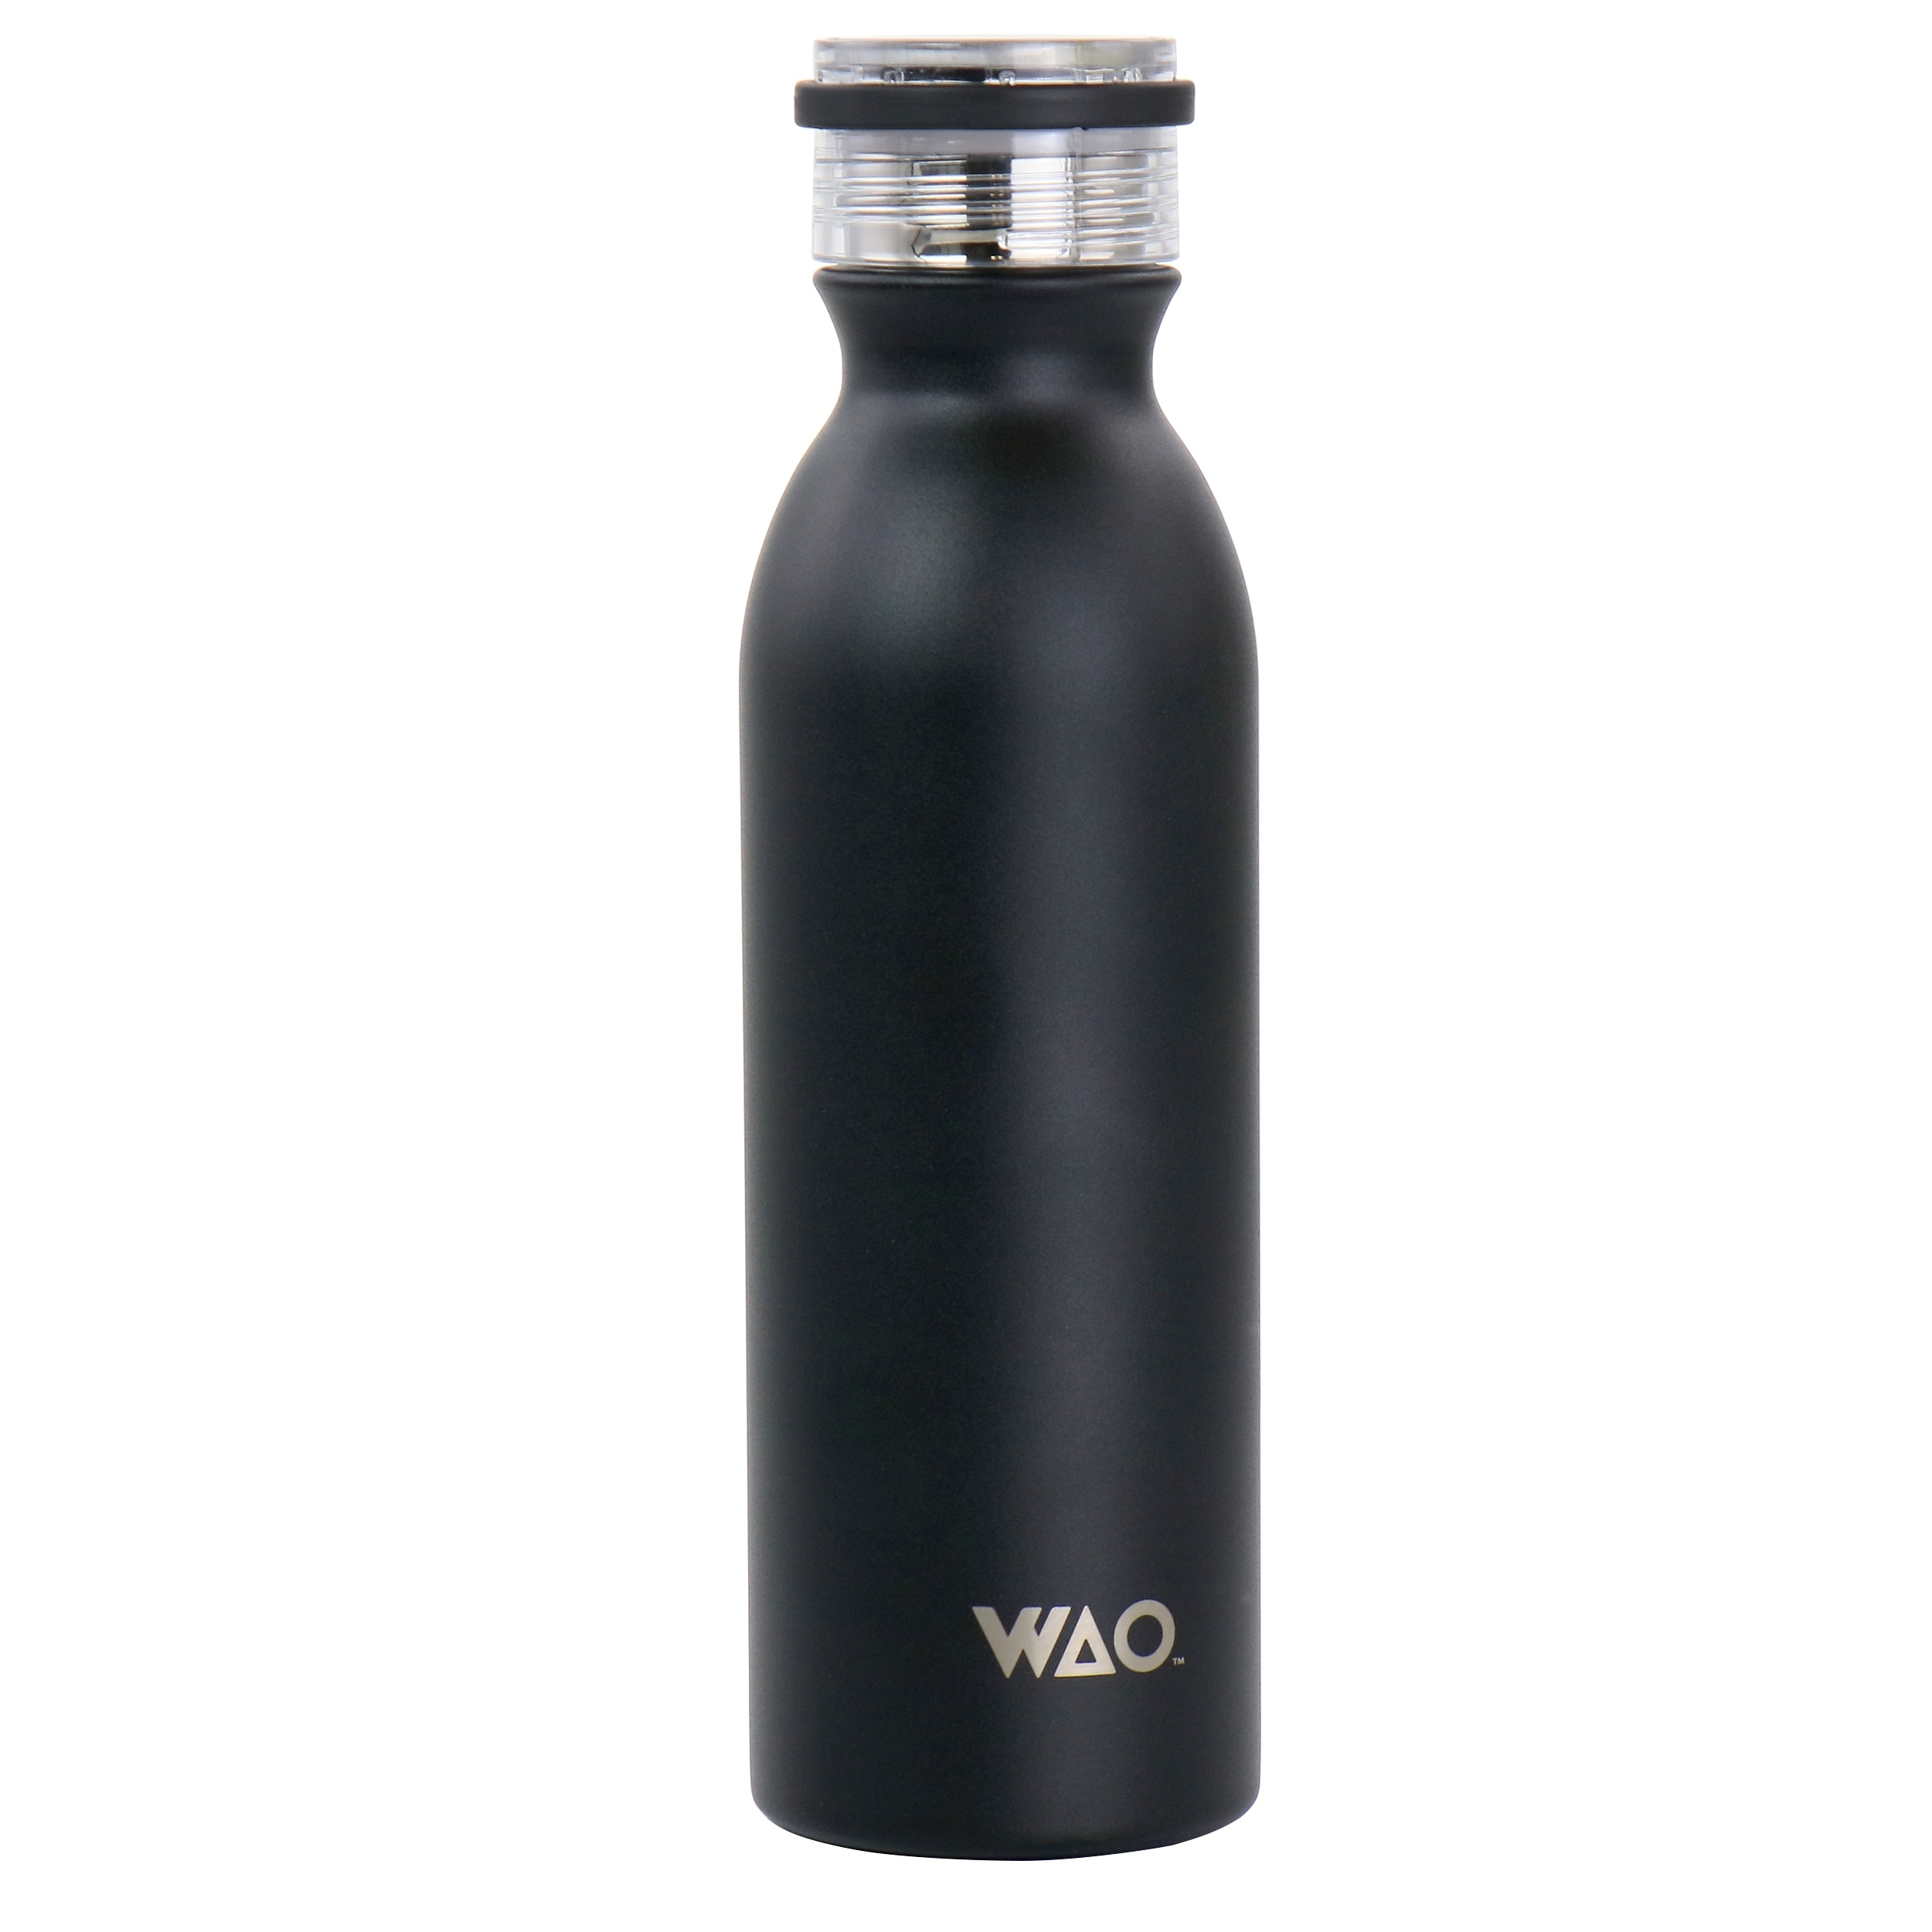 https://ak1.ostkcdn.com/images/products/is/images/direct/e101411890504c5362e4eafa5deec534209aaa2f/WAO-20-Ounce-Stainless-Steel-Insulated-Thermal-Bottle-with-Lid.jpg